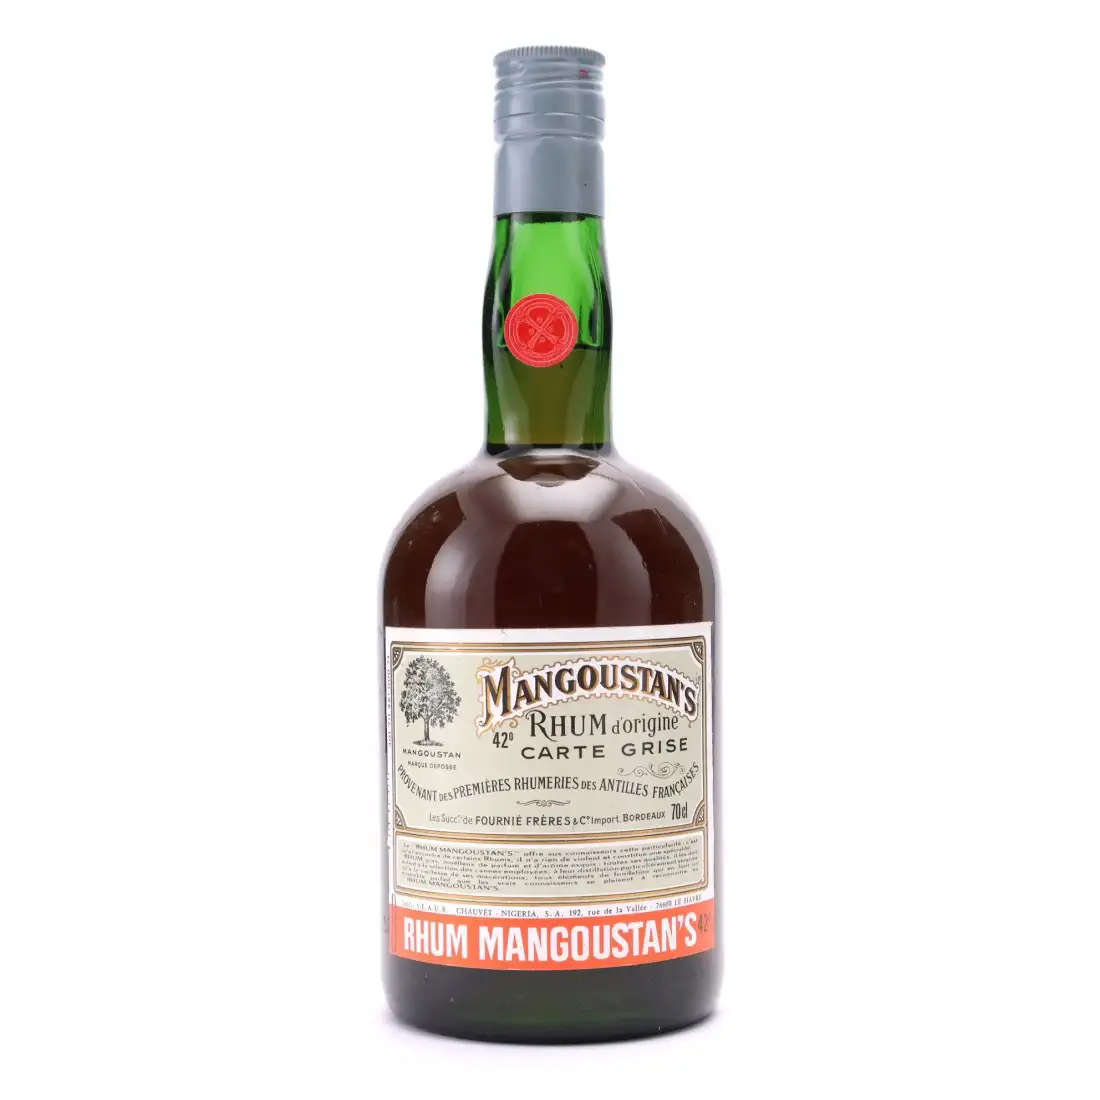 Image of the front of the bottle of the rum Rhum Mangoustan‘s Carte Grise